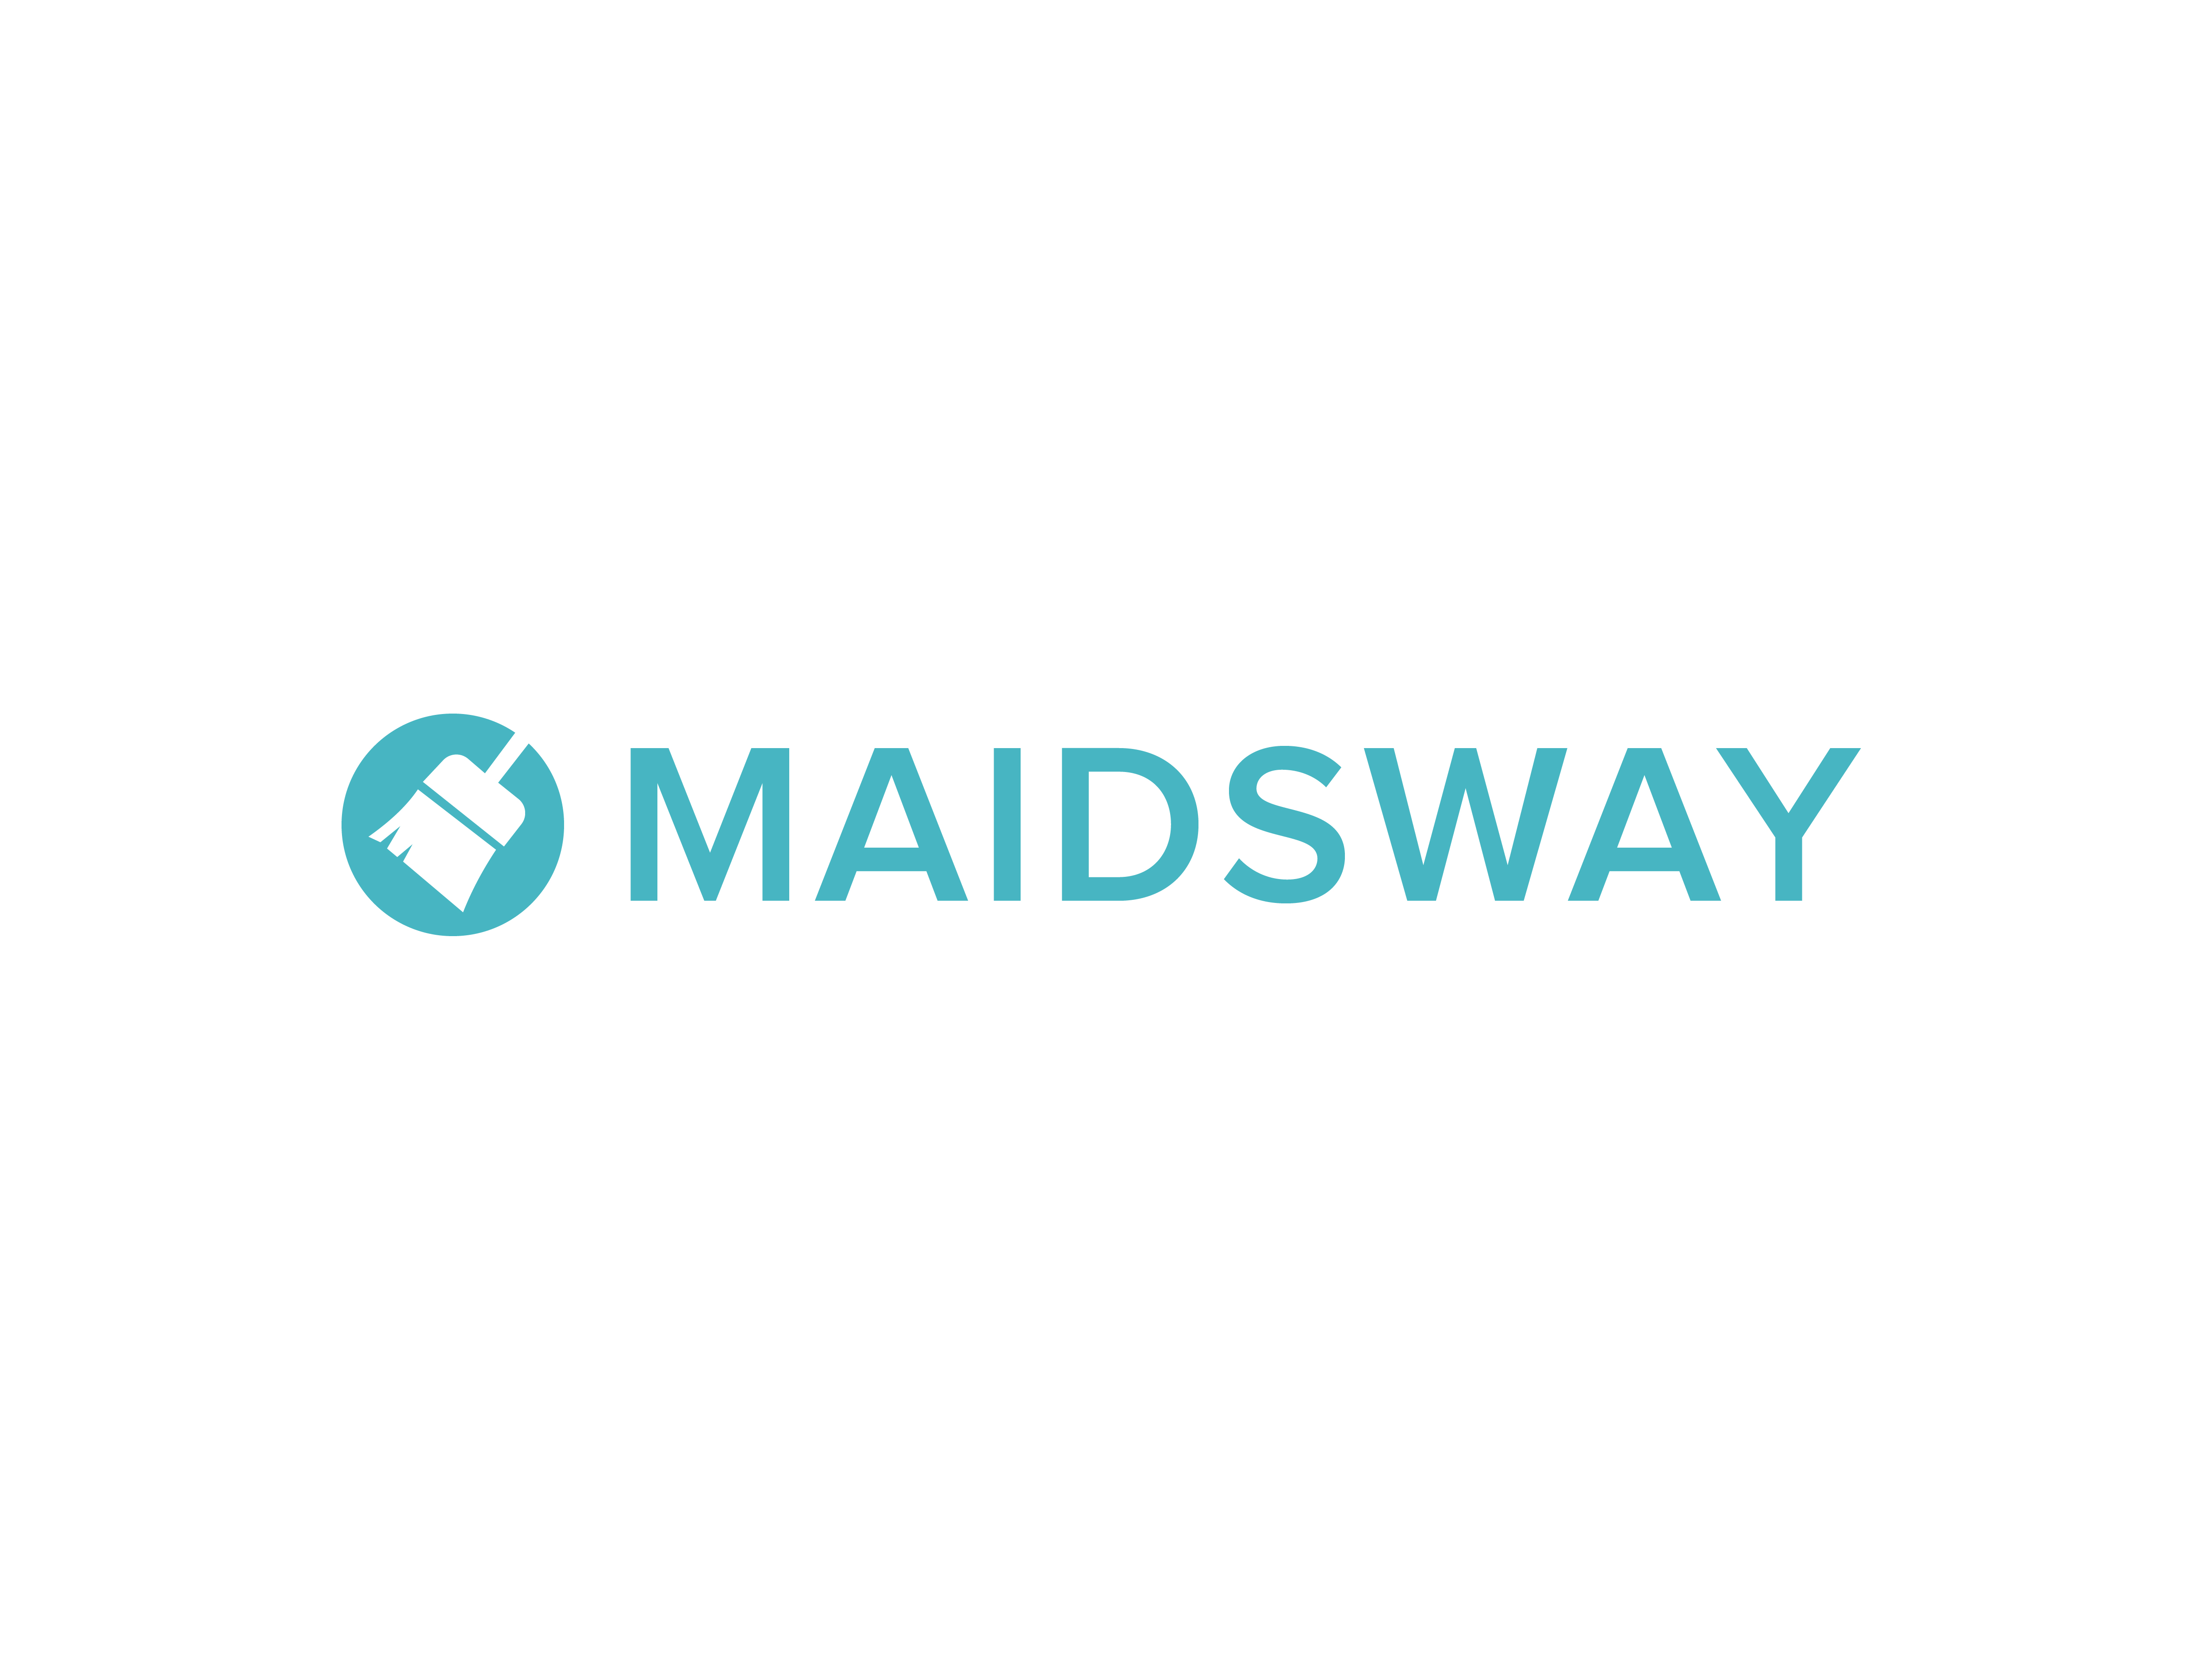 Maidsway Cleaning Service Inc